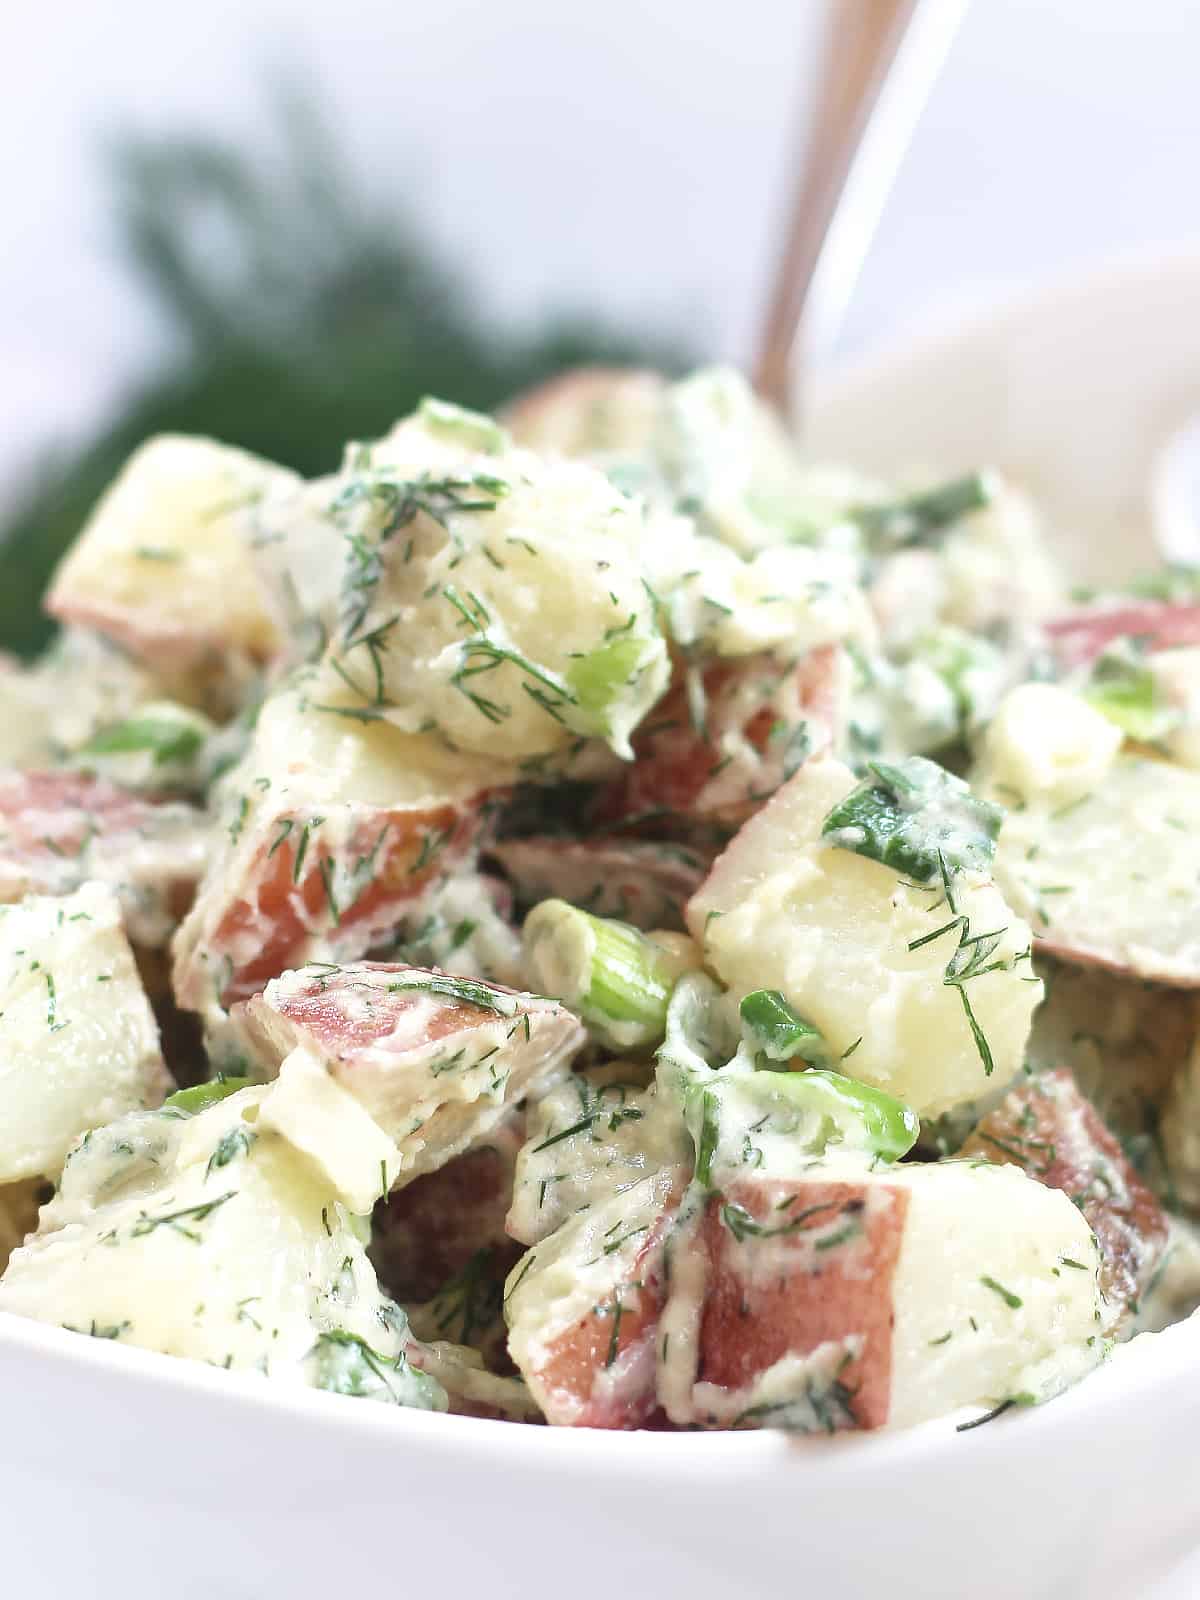 Chunks of potatoes coated in a creamy dressing.